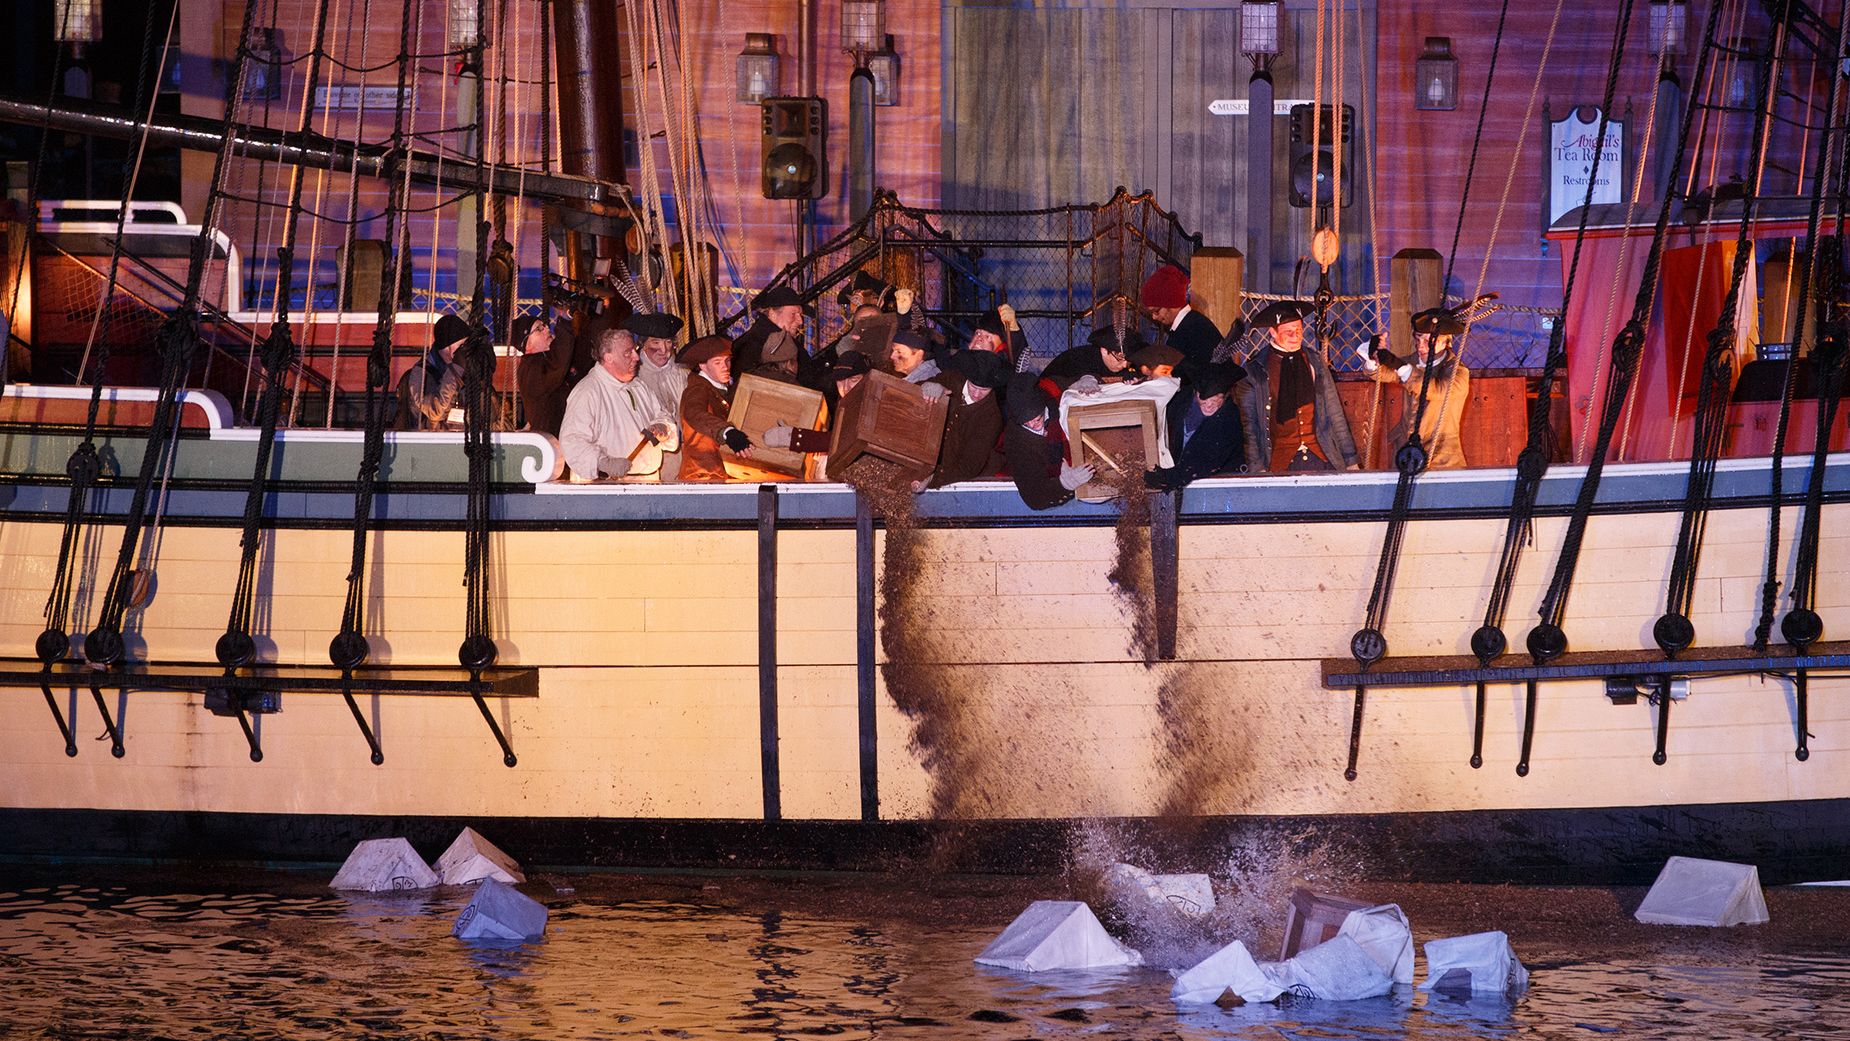 Boston Tea Party 250th anniversary: City to re-enact key moment in ...